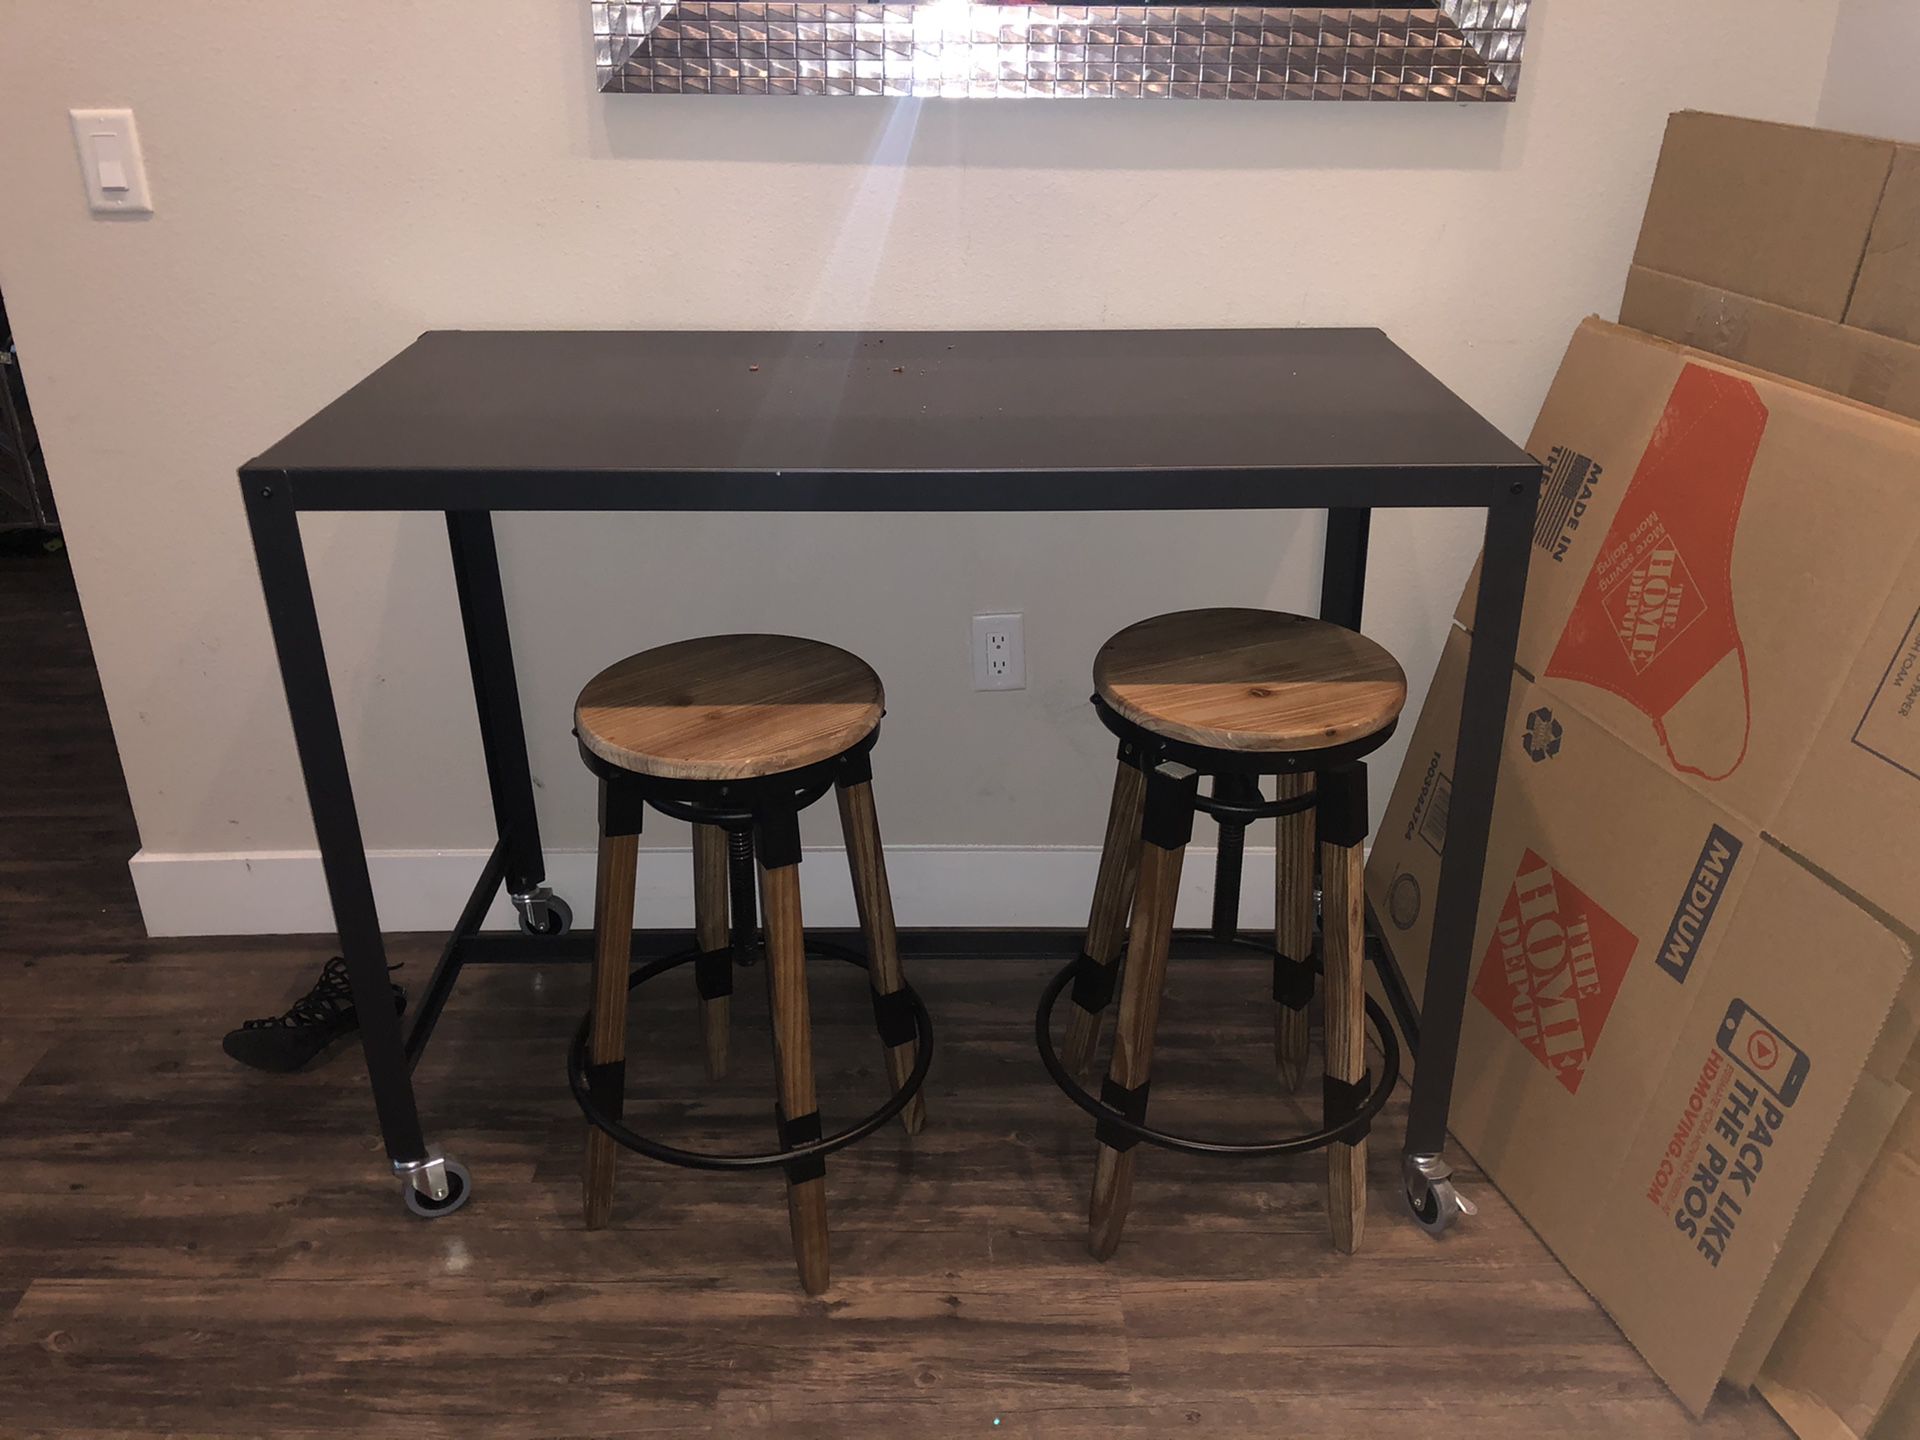 Black industrial style bar top table with two adjustable stools